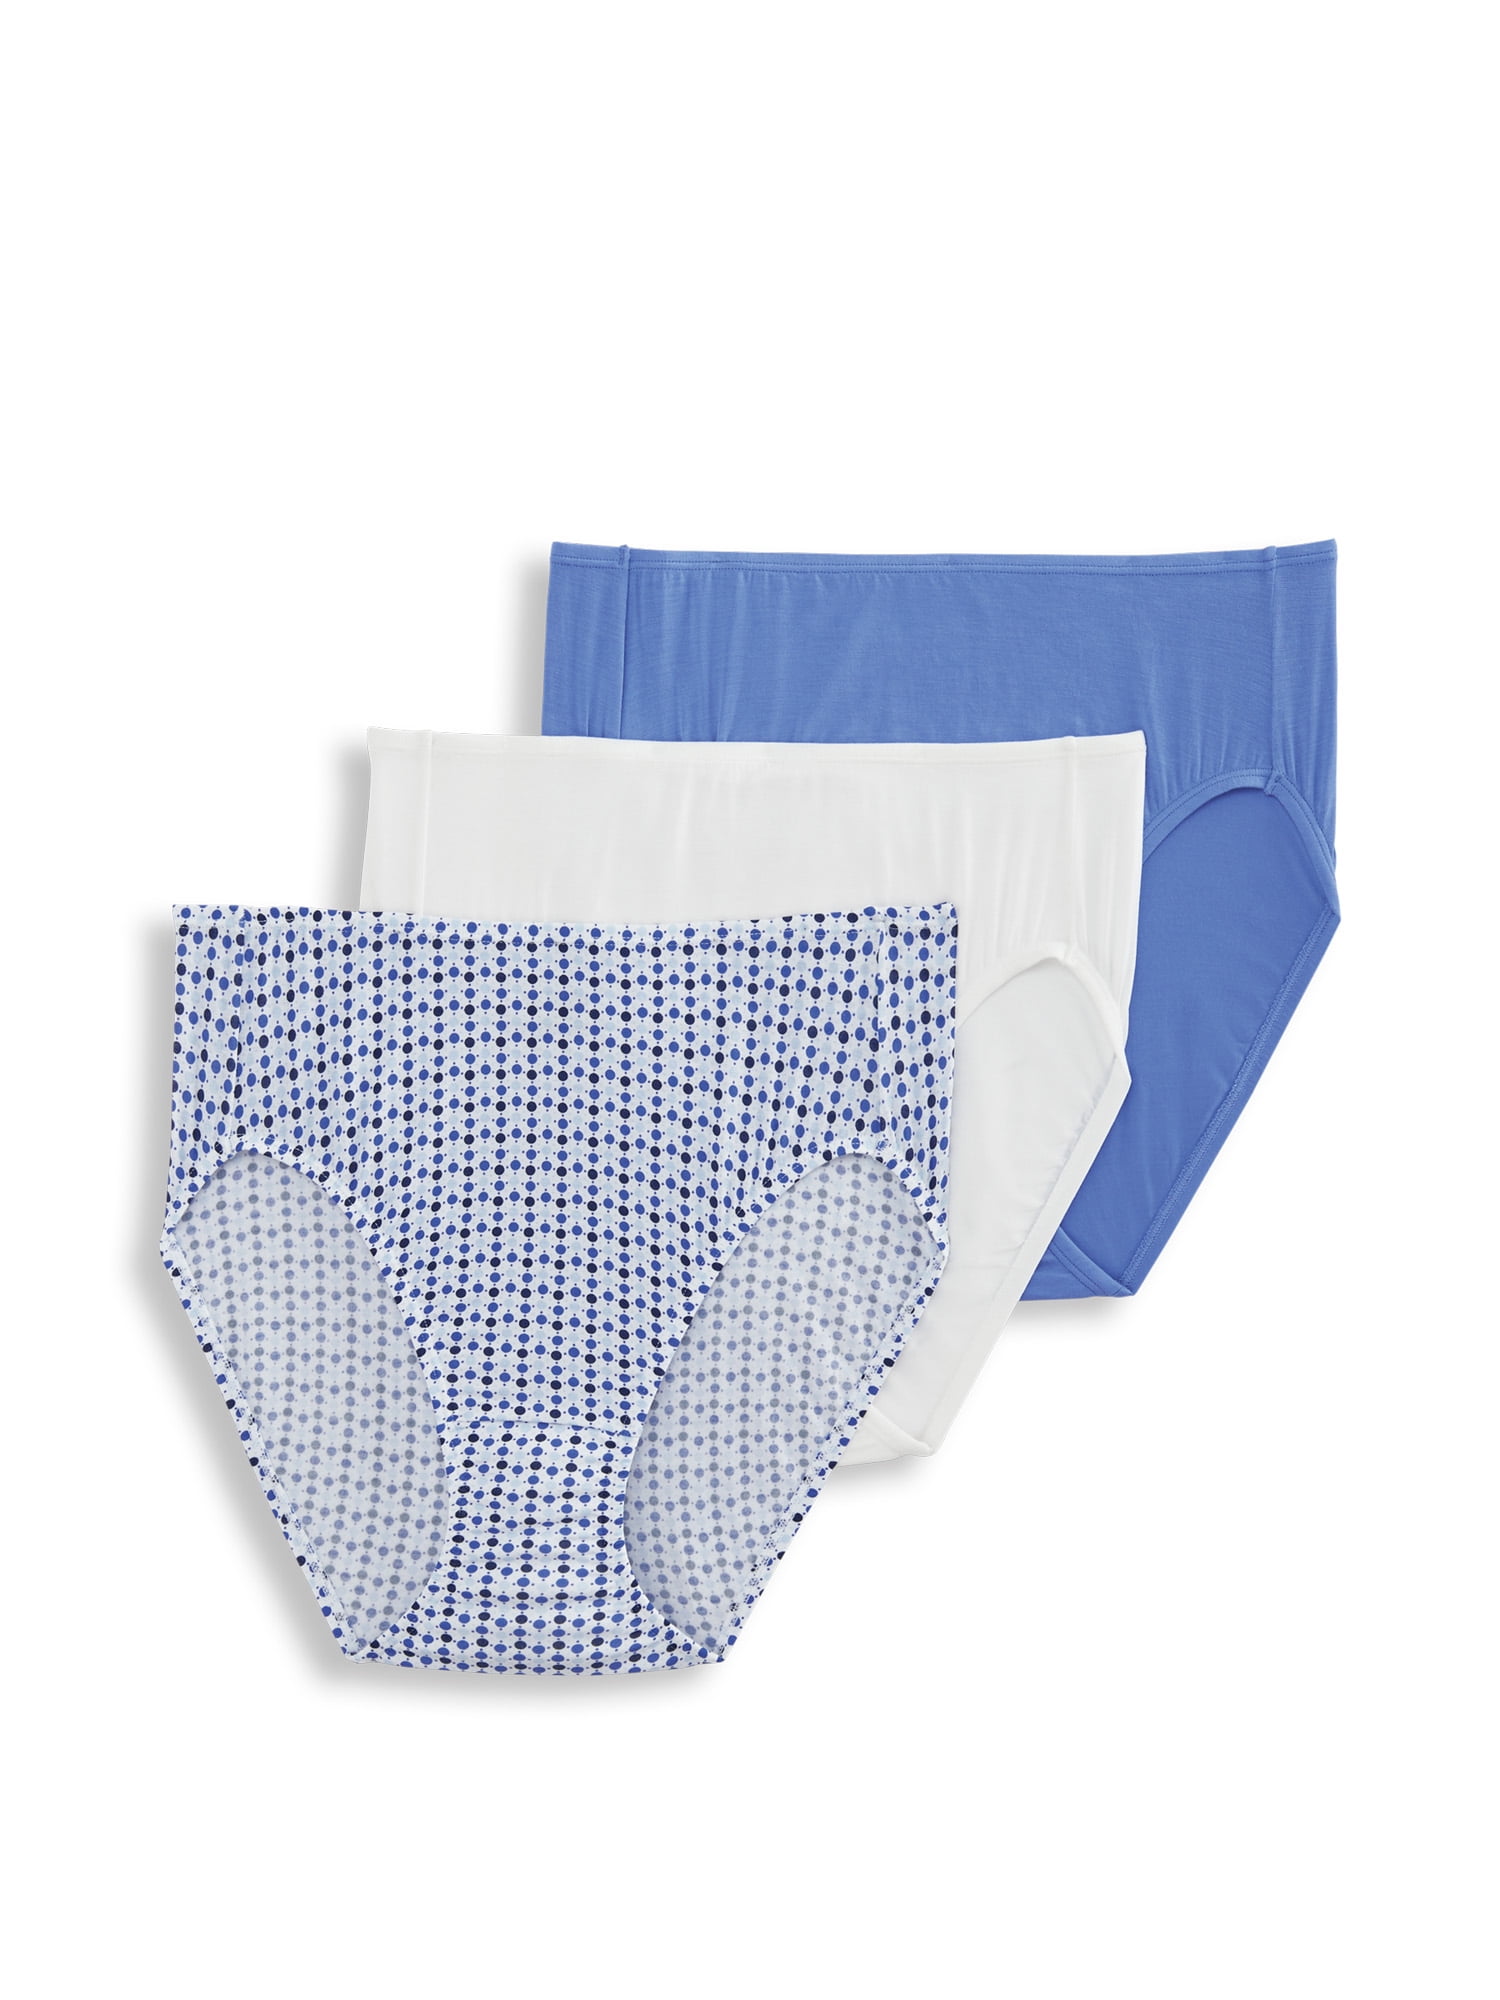 Jockey classics French Cut Underwear 3 Pack 9480, 9481, Extended Sizes  Size: 8: Buy Online in the UAE, Price from 159 EAD & Shipping to Dubai